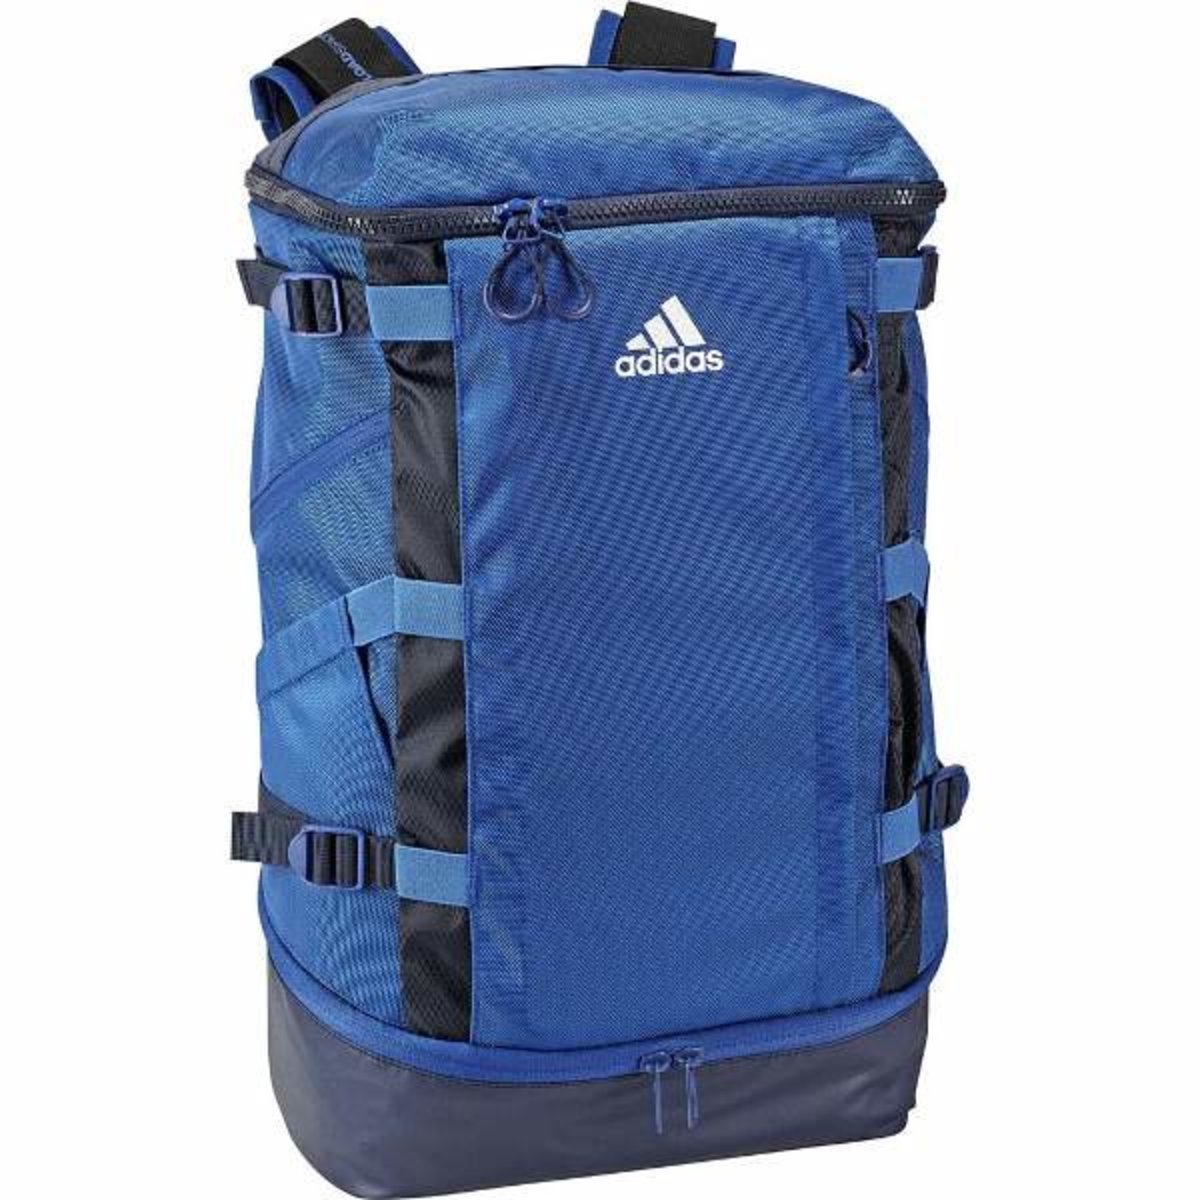 Adidas Blue Backpack 30l Japan Adidas Ops Multi Fuction Shoulders Protection 30l Backpack Hktvmall Online Shopping